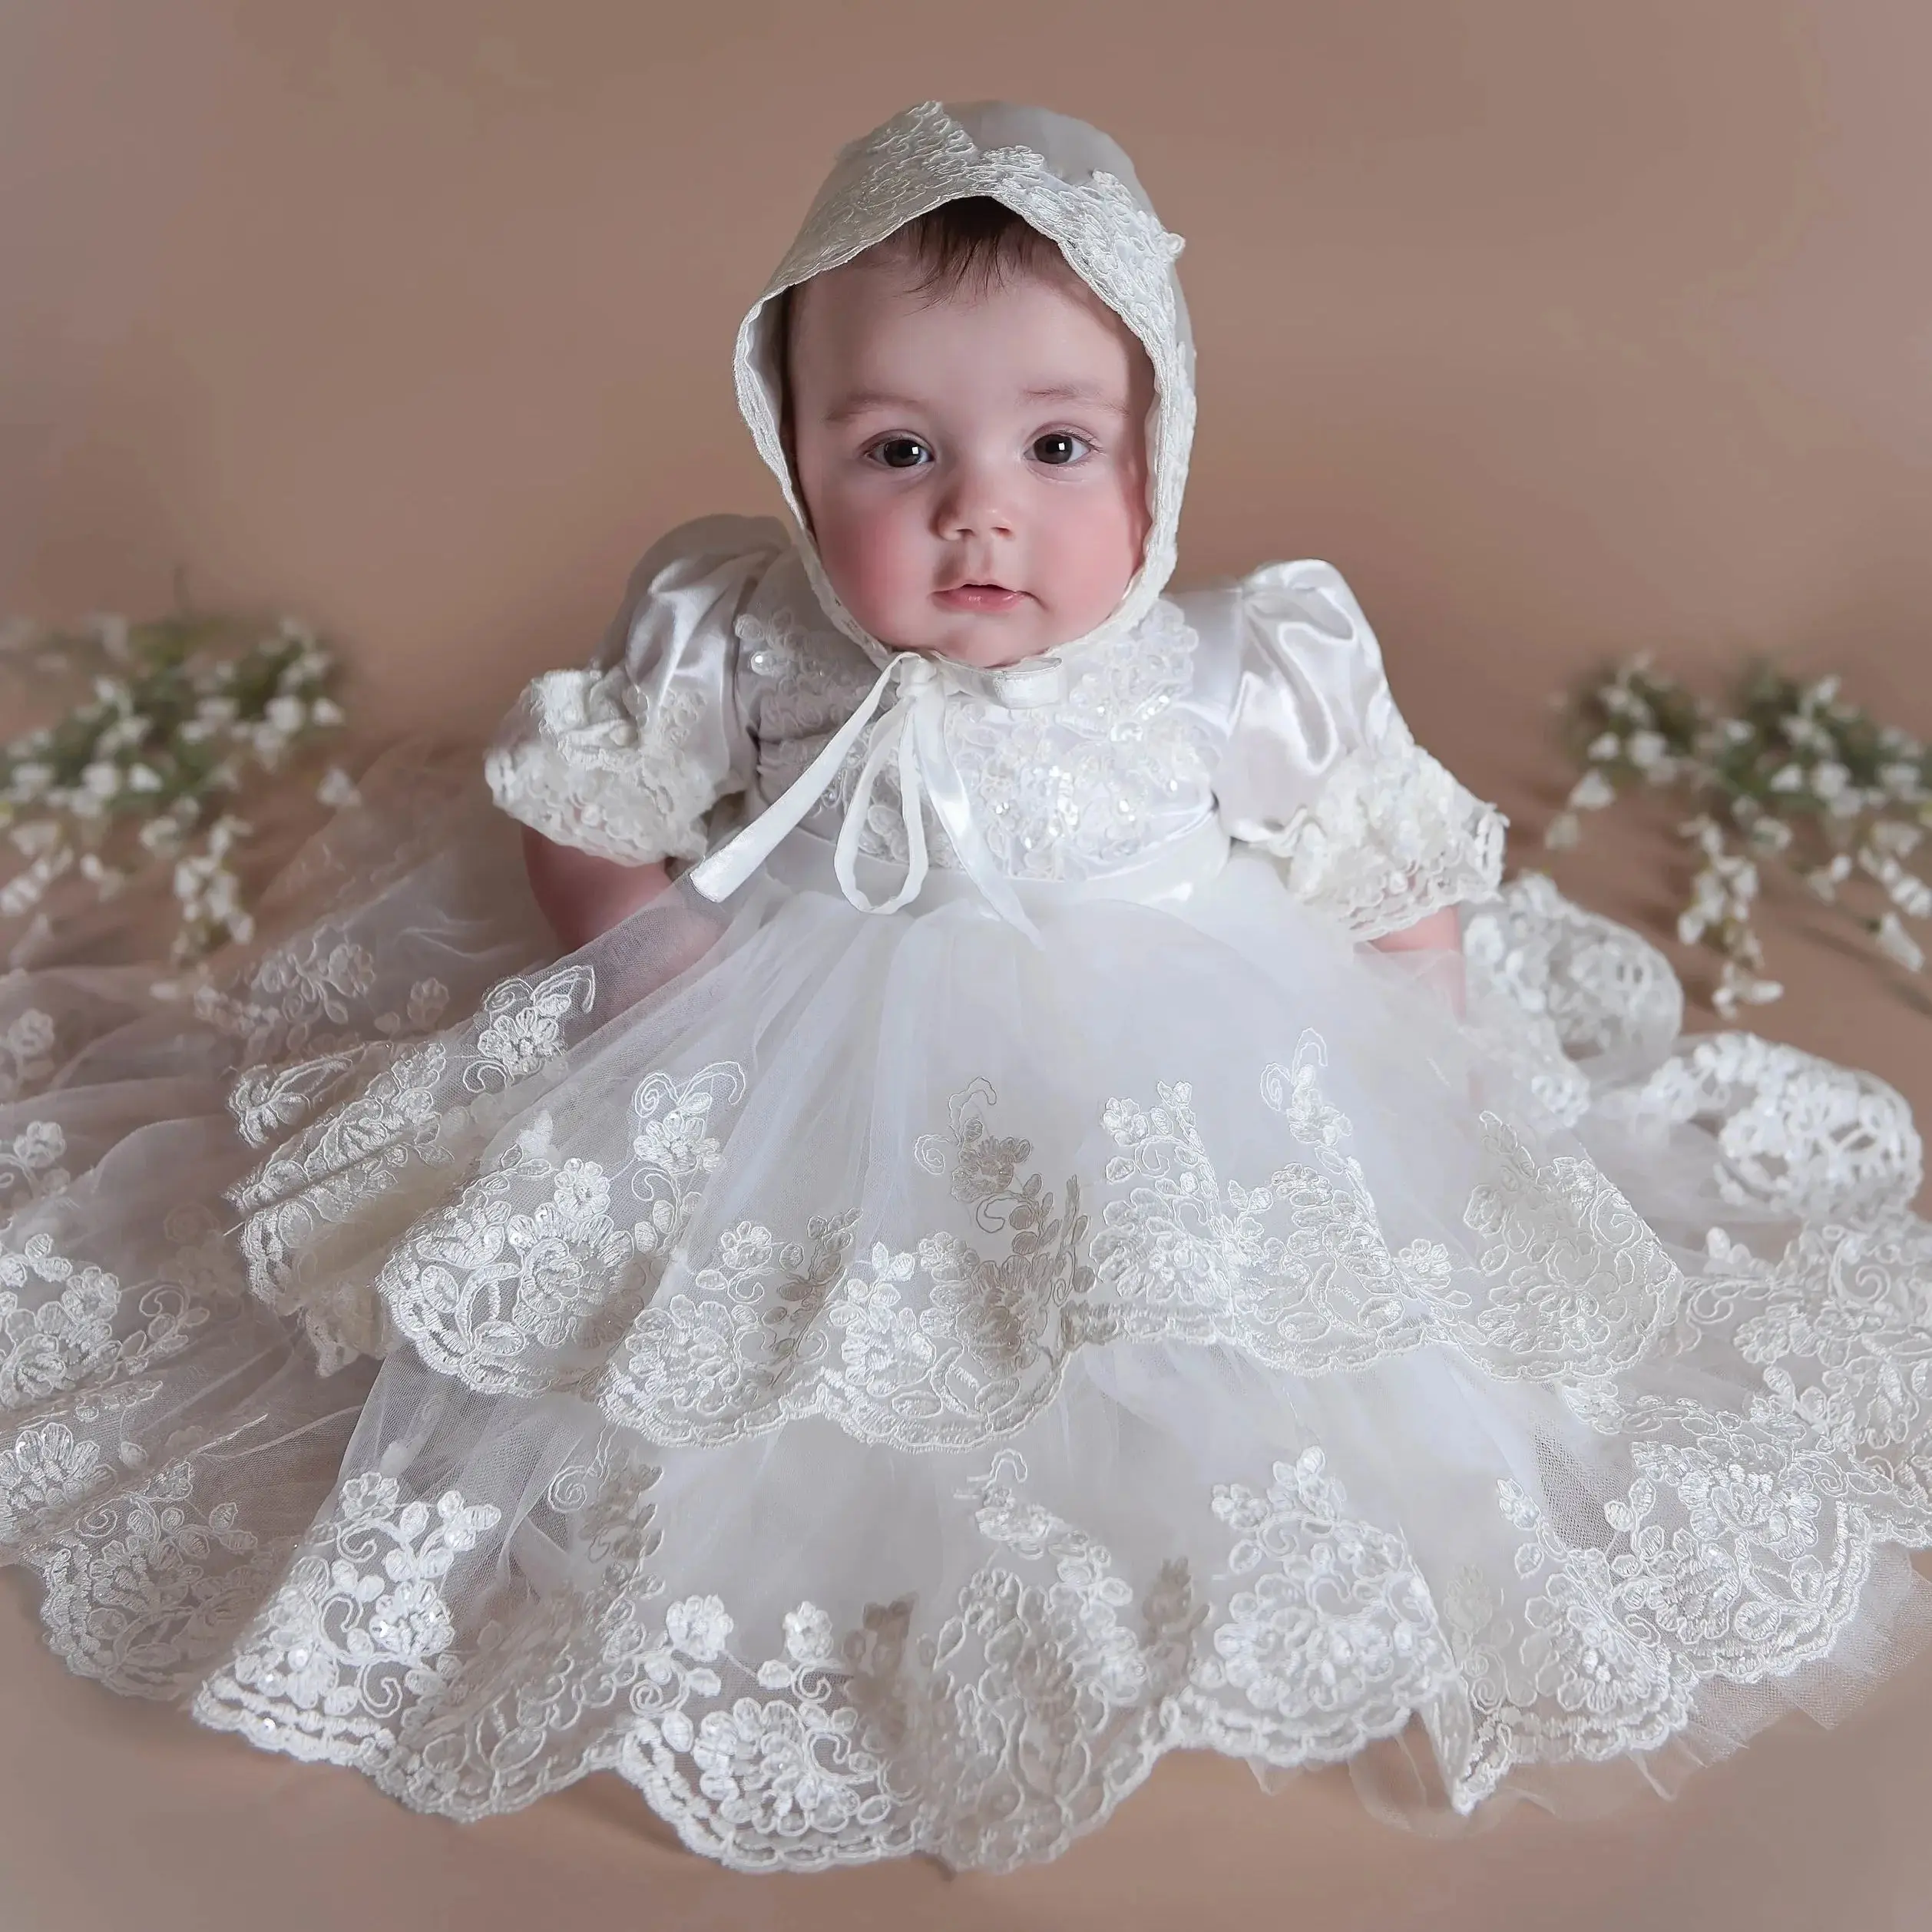 

White Ball Gown Baby Christening Gowns Lace Sequins Toddler Girls Baptism Dresses Bows Newborn Infant First Communion Dresses